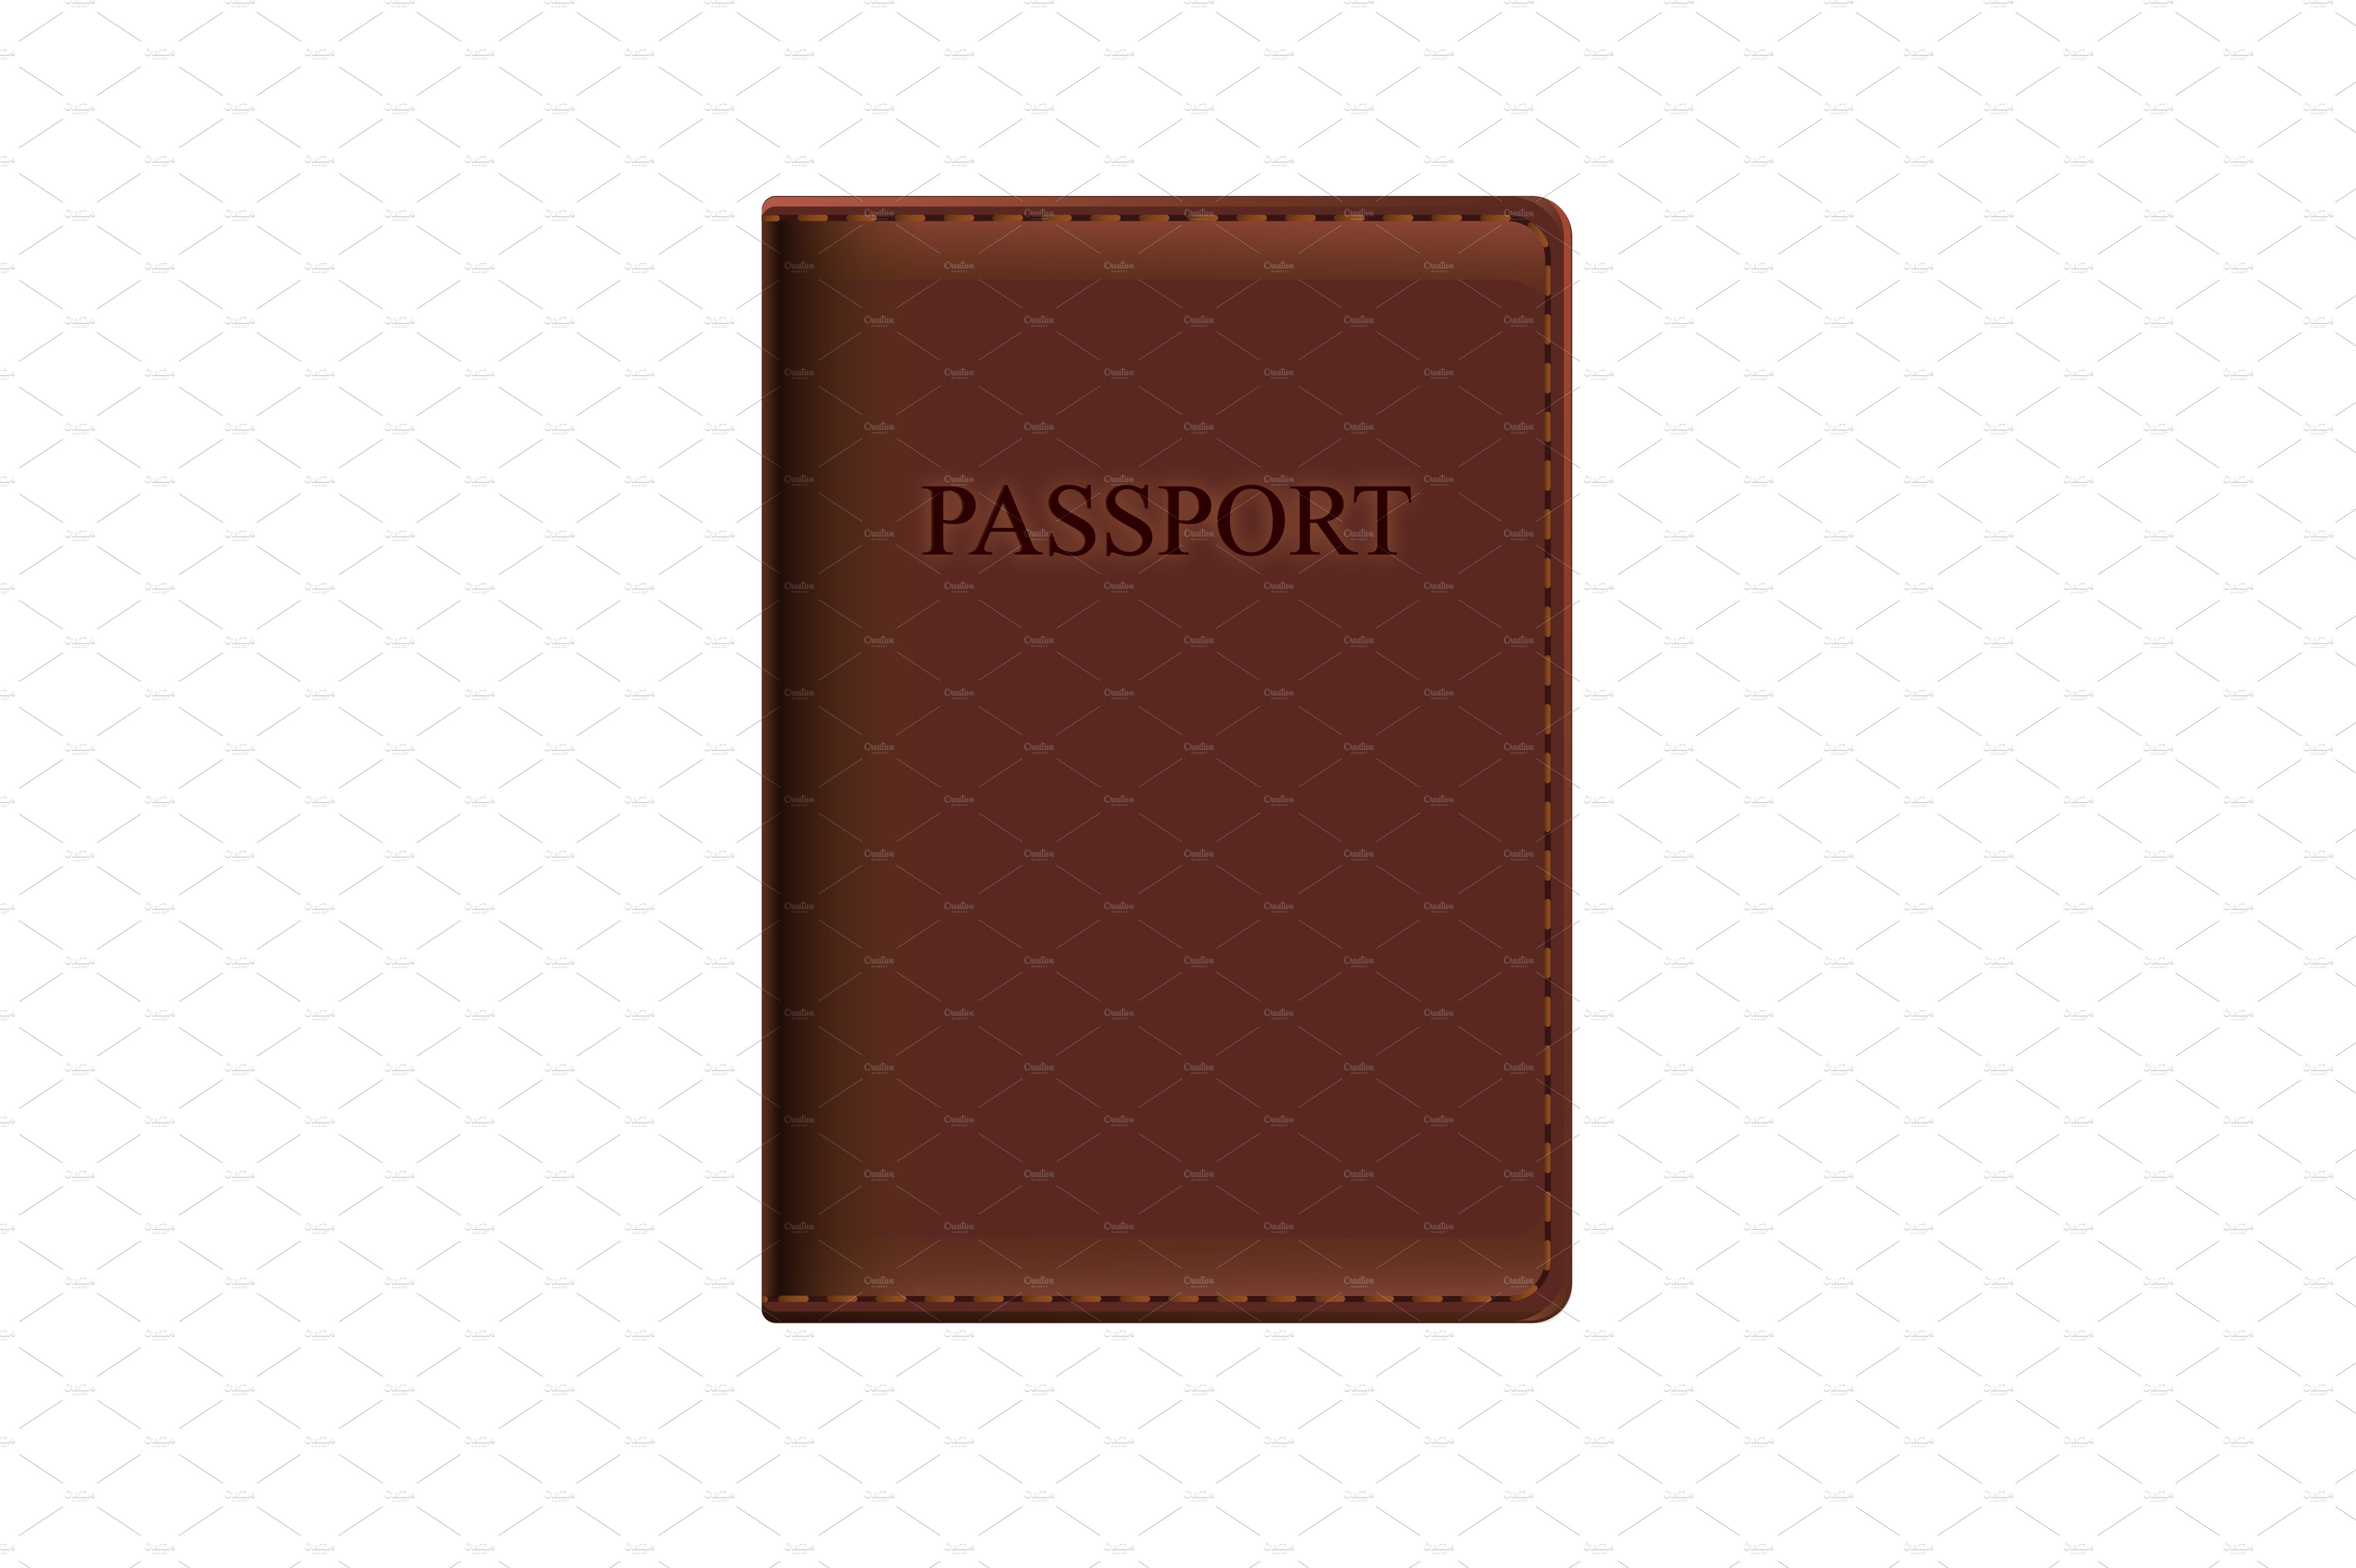 Passport cover isolated cover image.